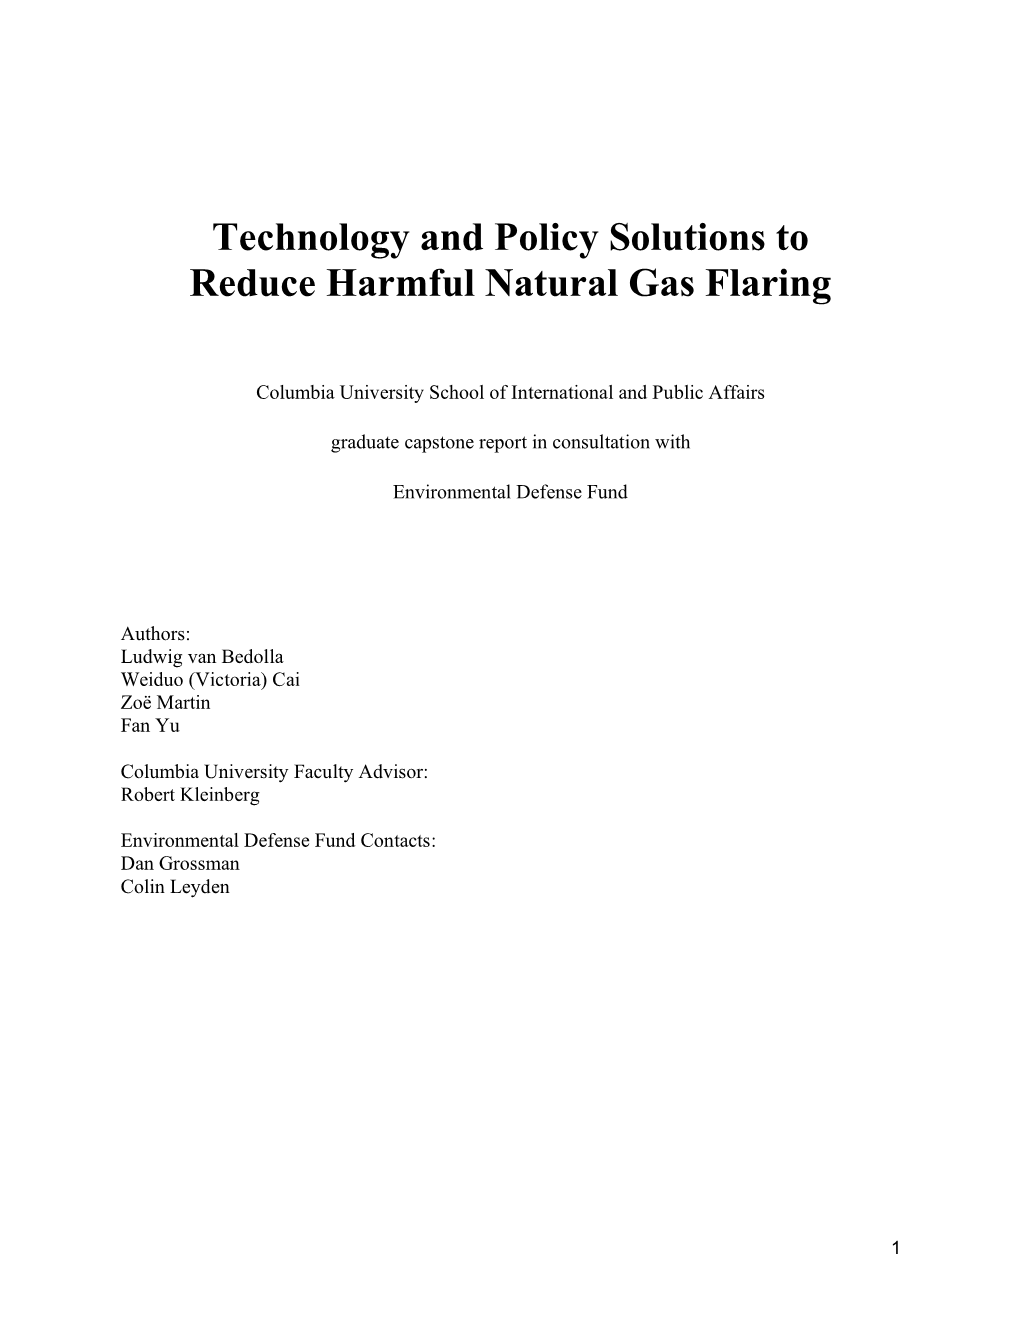 Technology and Policy Solutions to Reduce Harmful Natural Gas Flaring